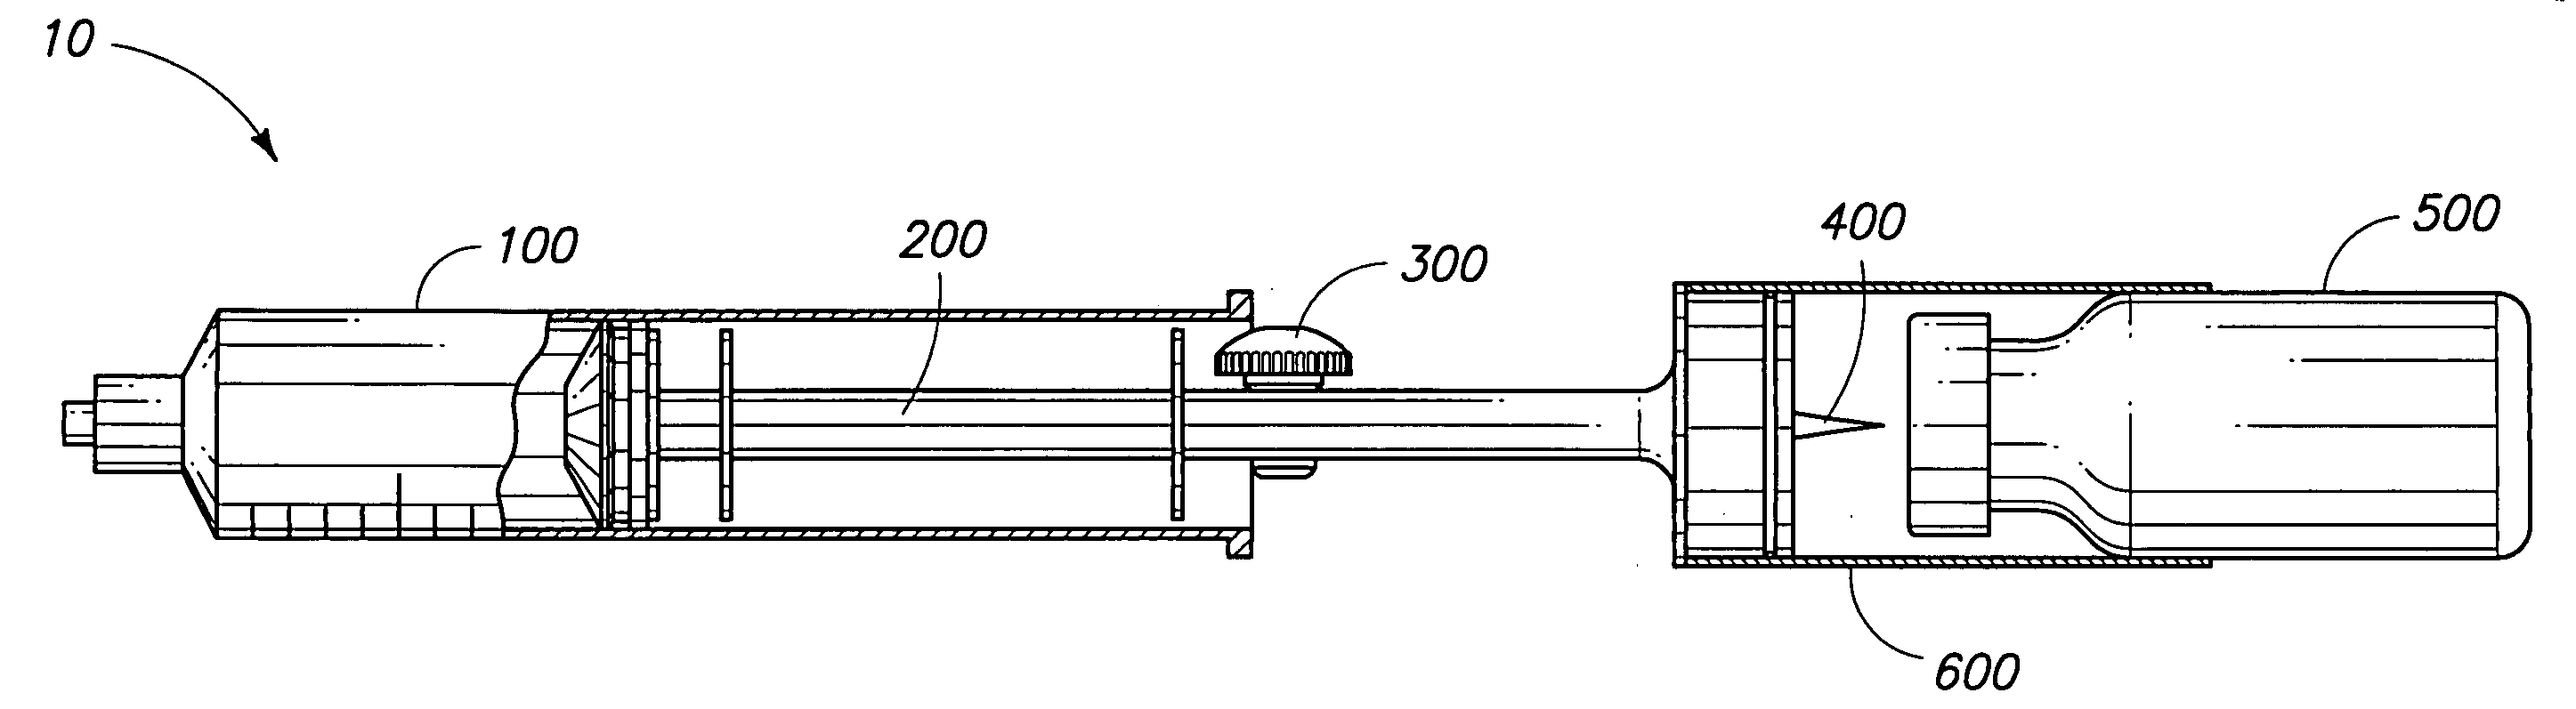 Syringe devices and methods for mixing and administering medication